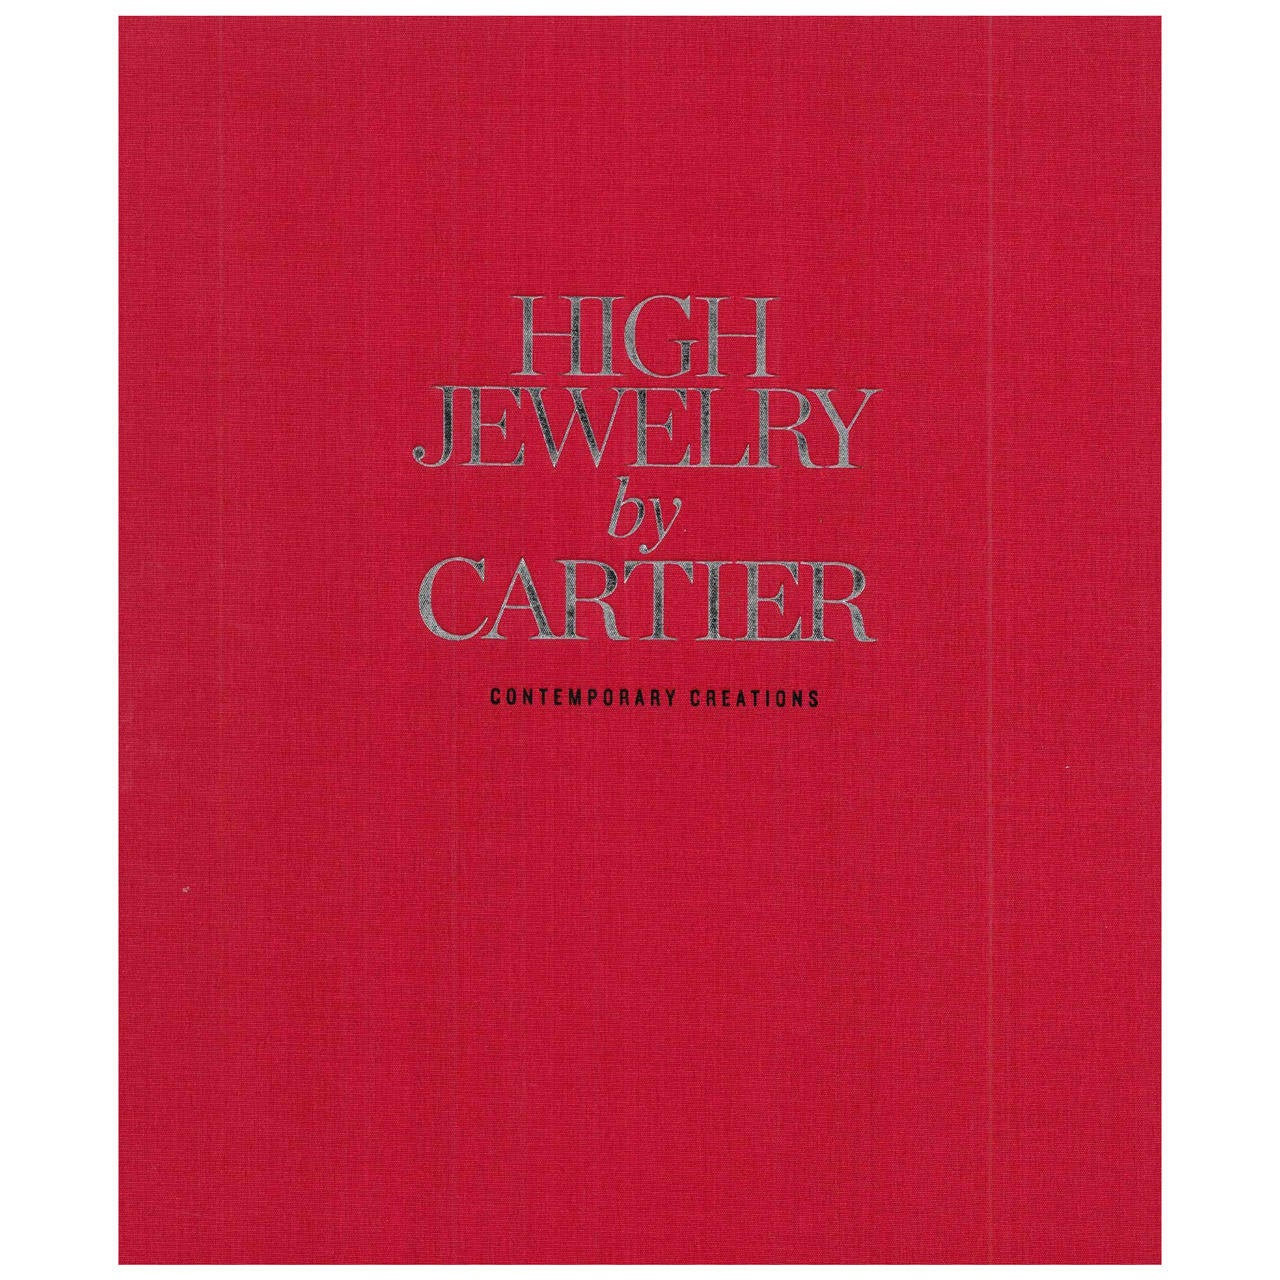 Book of HIGH JEWELRY by CARTIER - Contemporary Creations at 1stDibs ...